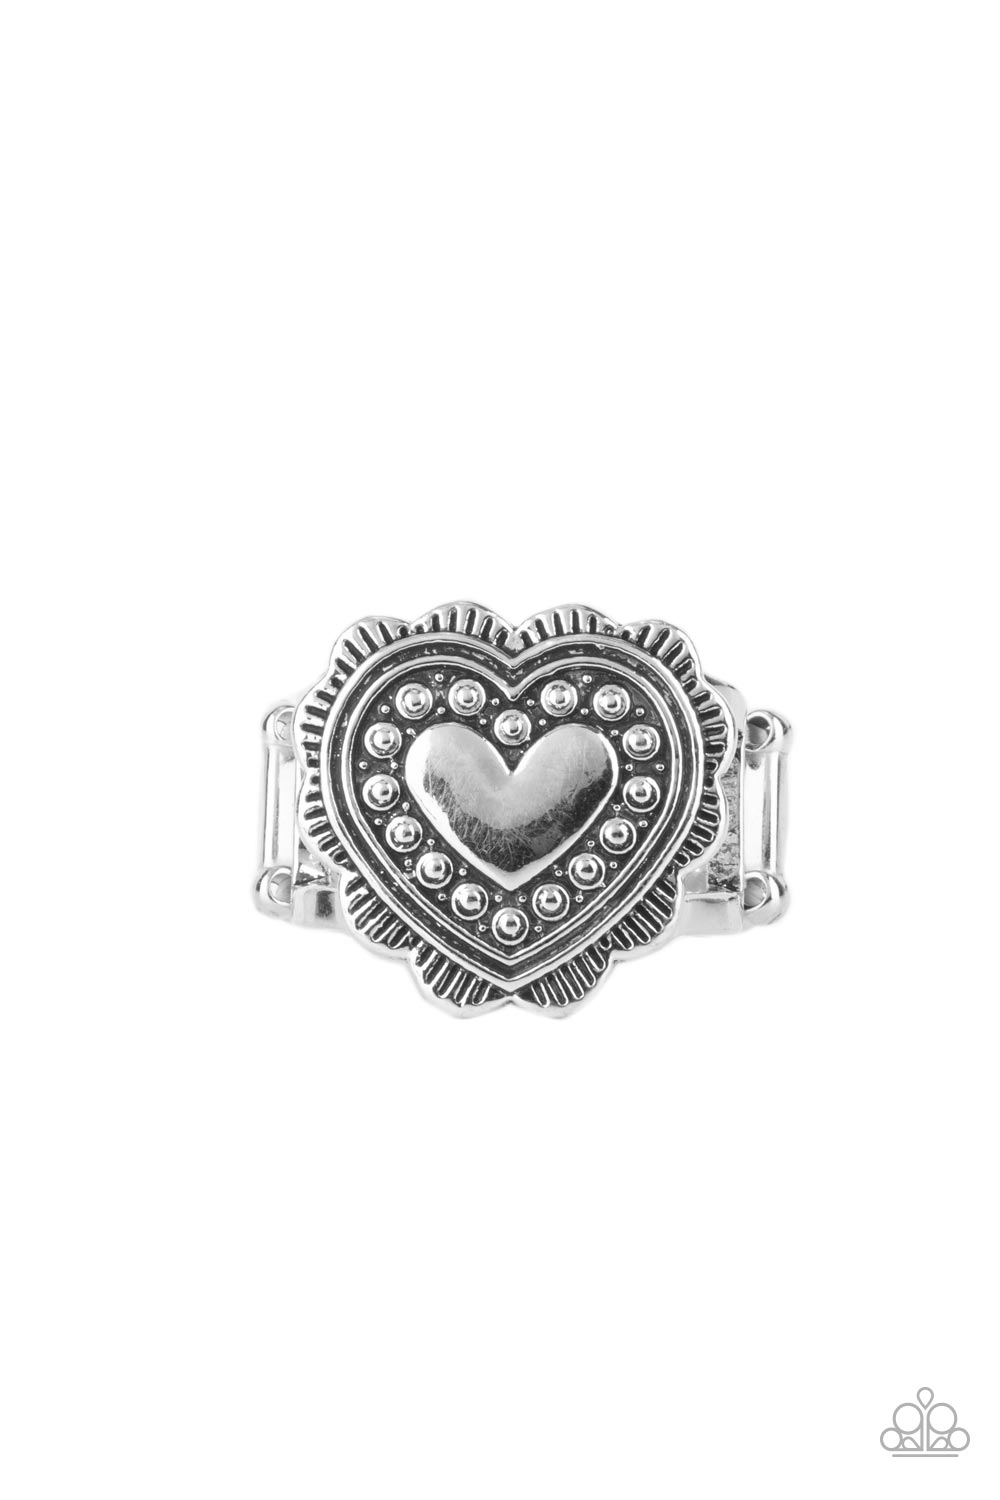 Southern Soulmate Silver Ring - Paparazzi Accessories  Scalloped in frilly detail, a studded silver heart frame sits atop two rustic silver bands for a romantically rustic look. Features a stretchy band for a flexible fit.  All Paparazzi Accessories are lead free and nickel free!   Sold as one individual ring.